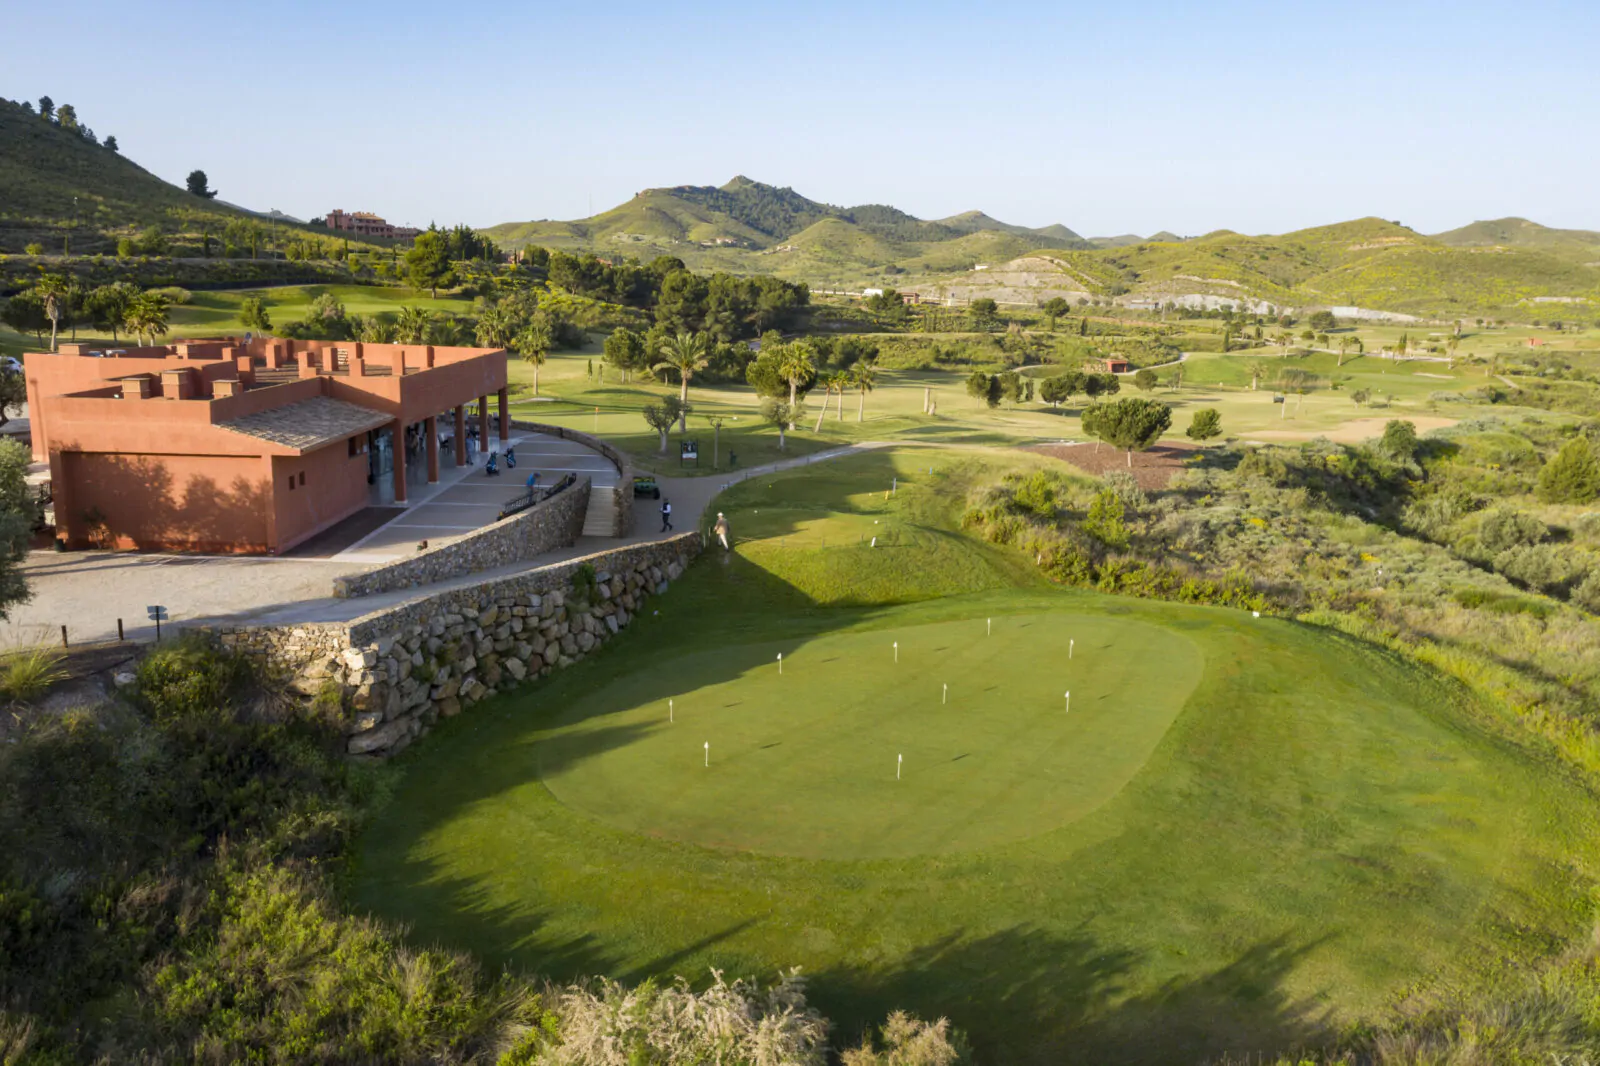 Lorca Golf Course Mayo 2022- mejores (27)